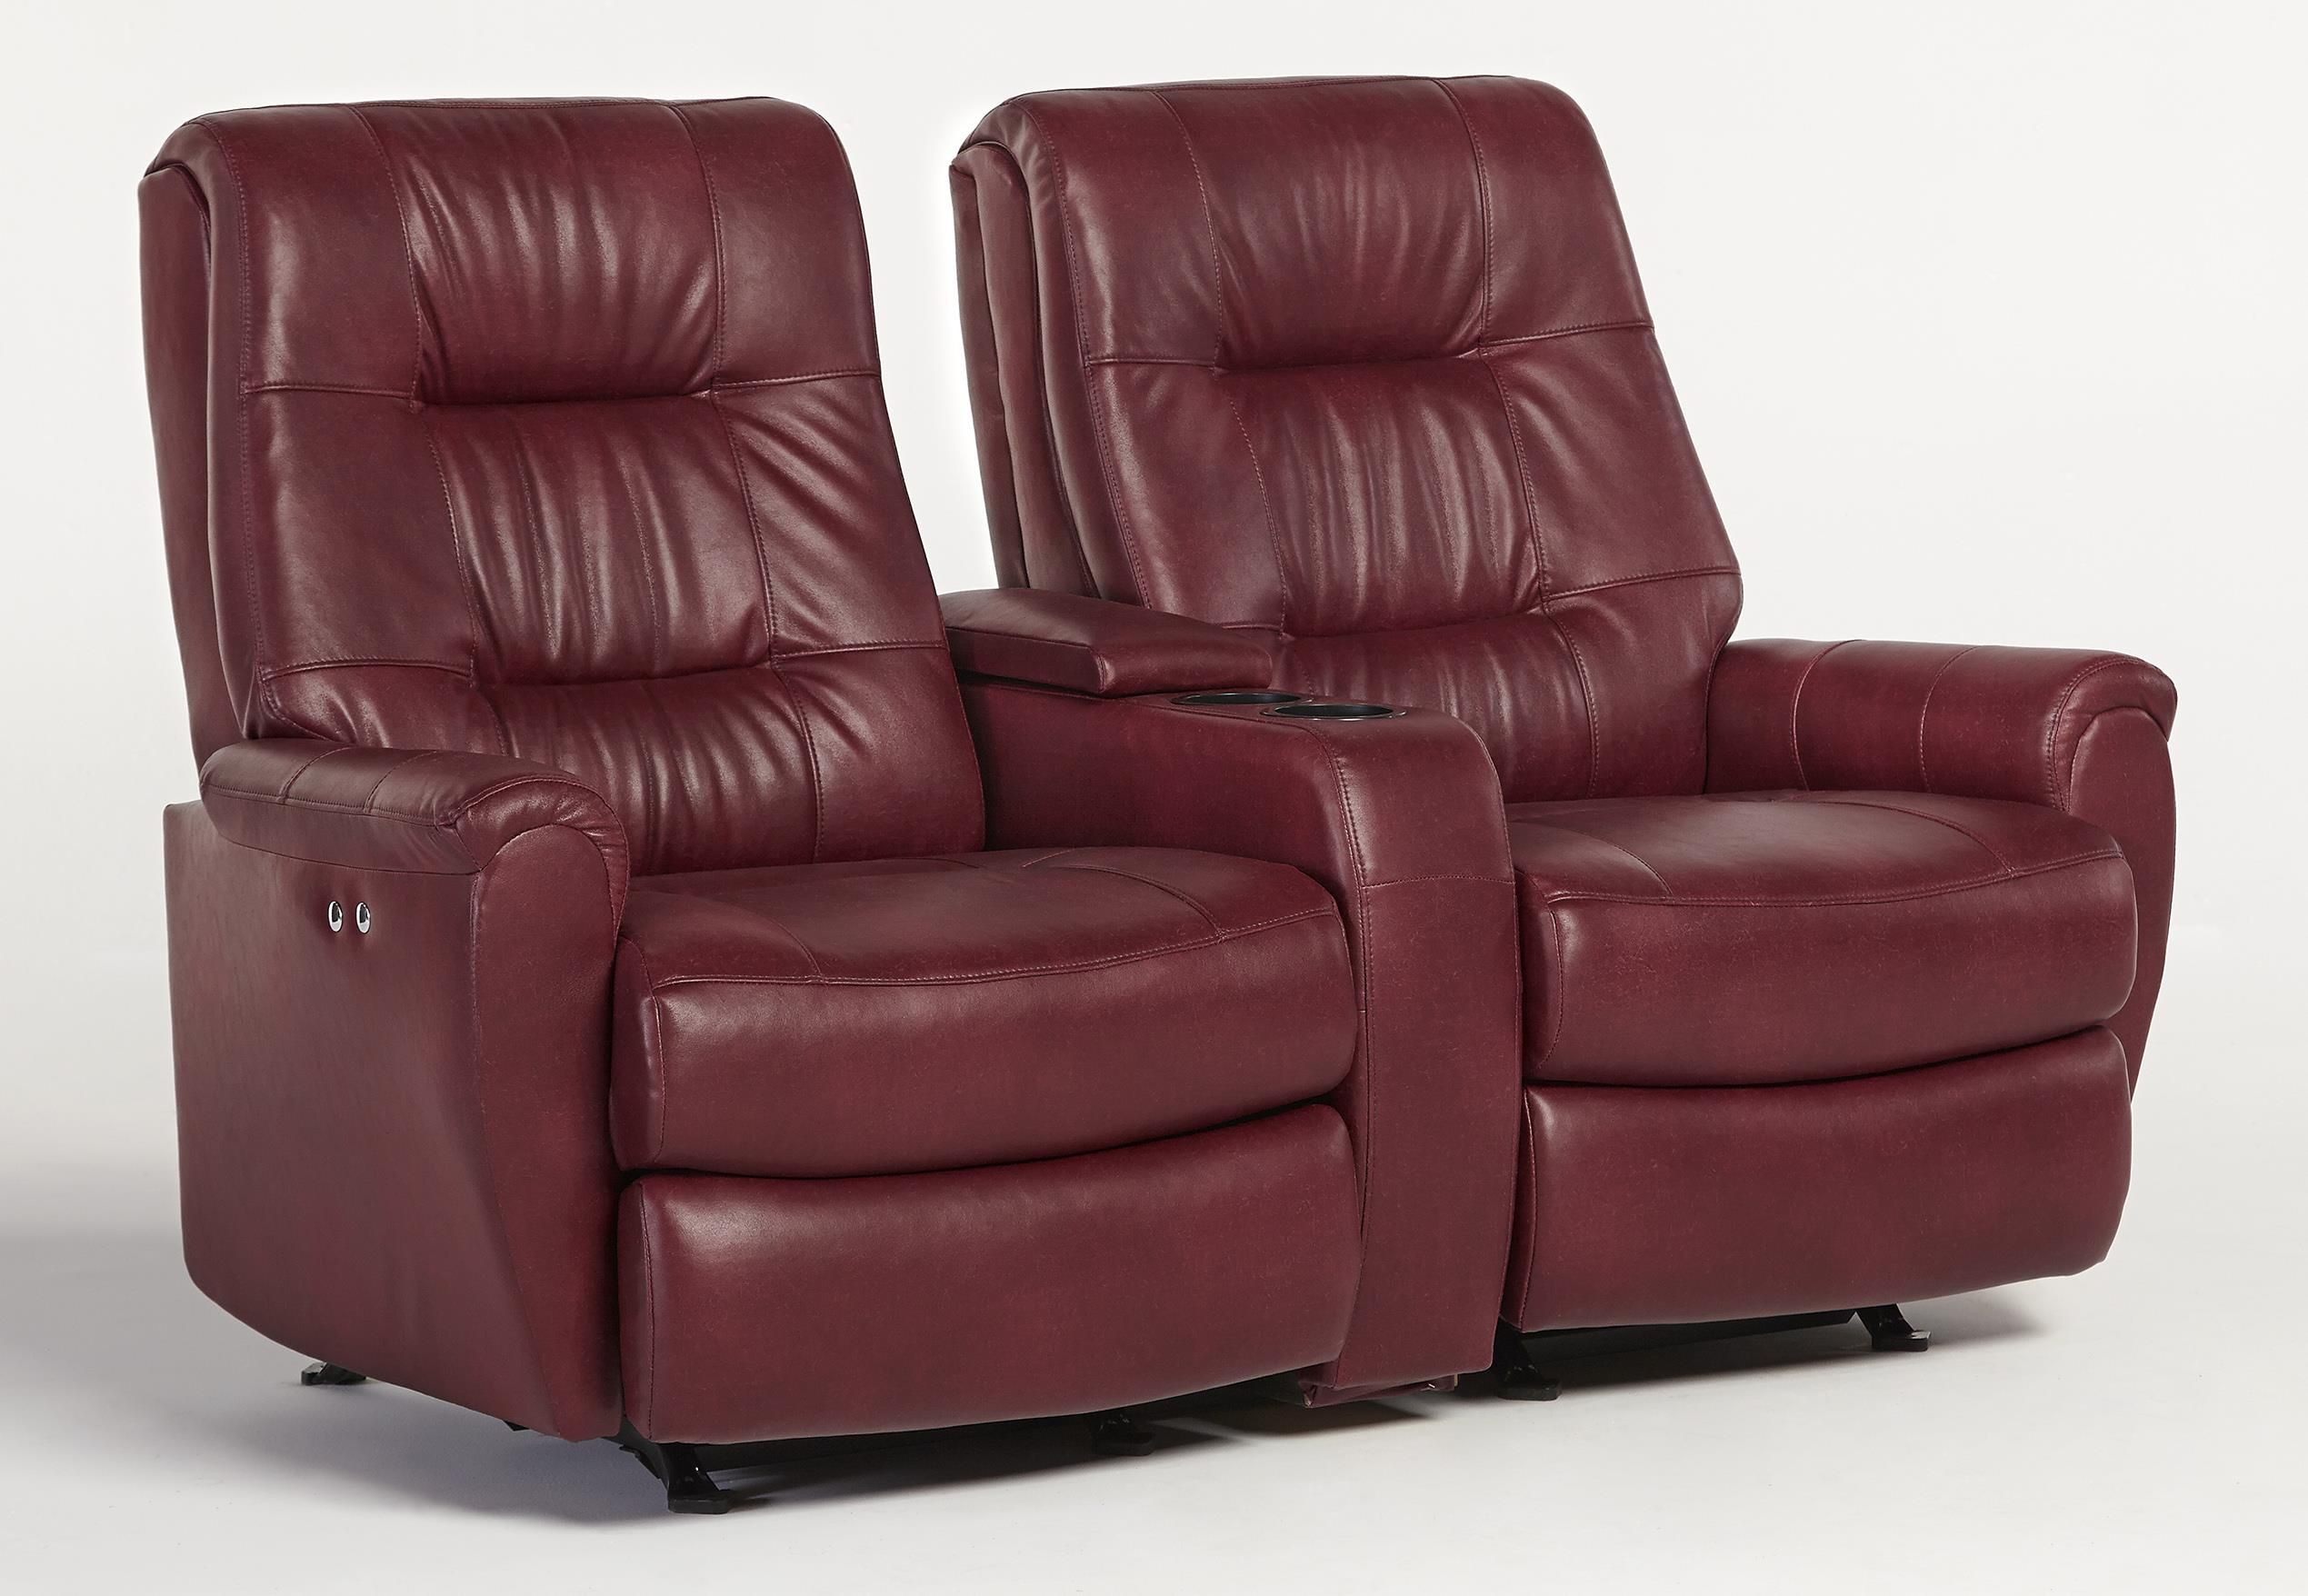 Recliner+Loveseats+for+Small+Spaces | Small-Scale Reclining Space Saver  Loveseat with Drink and Storage .